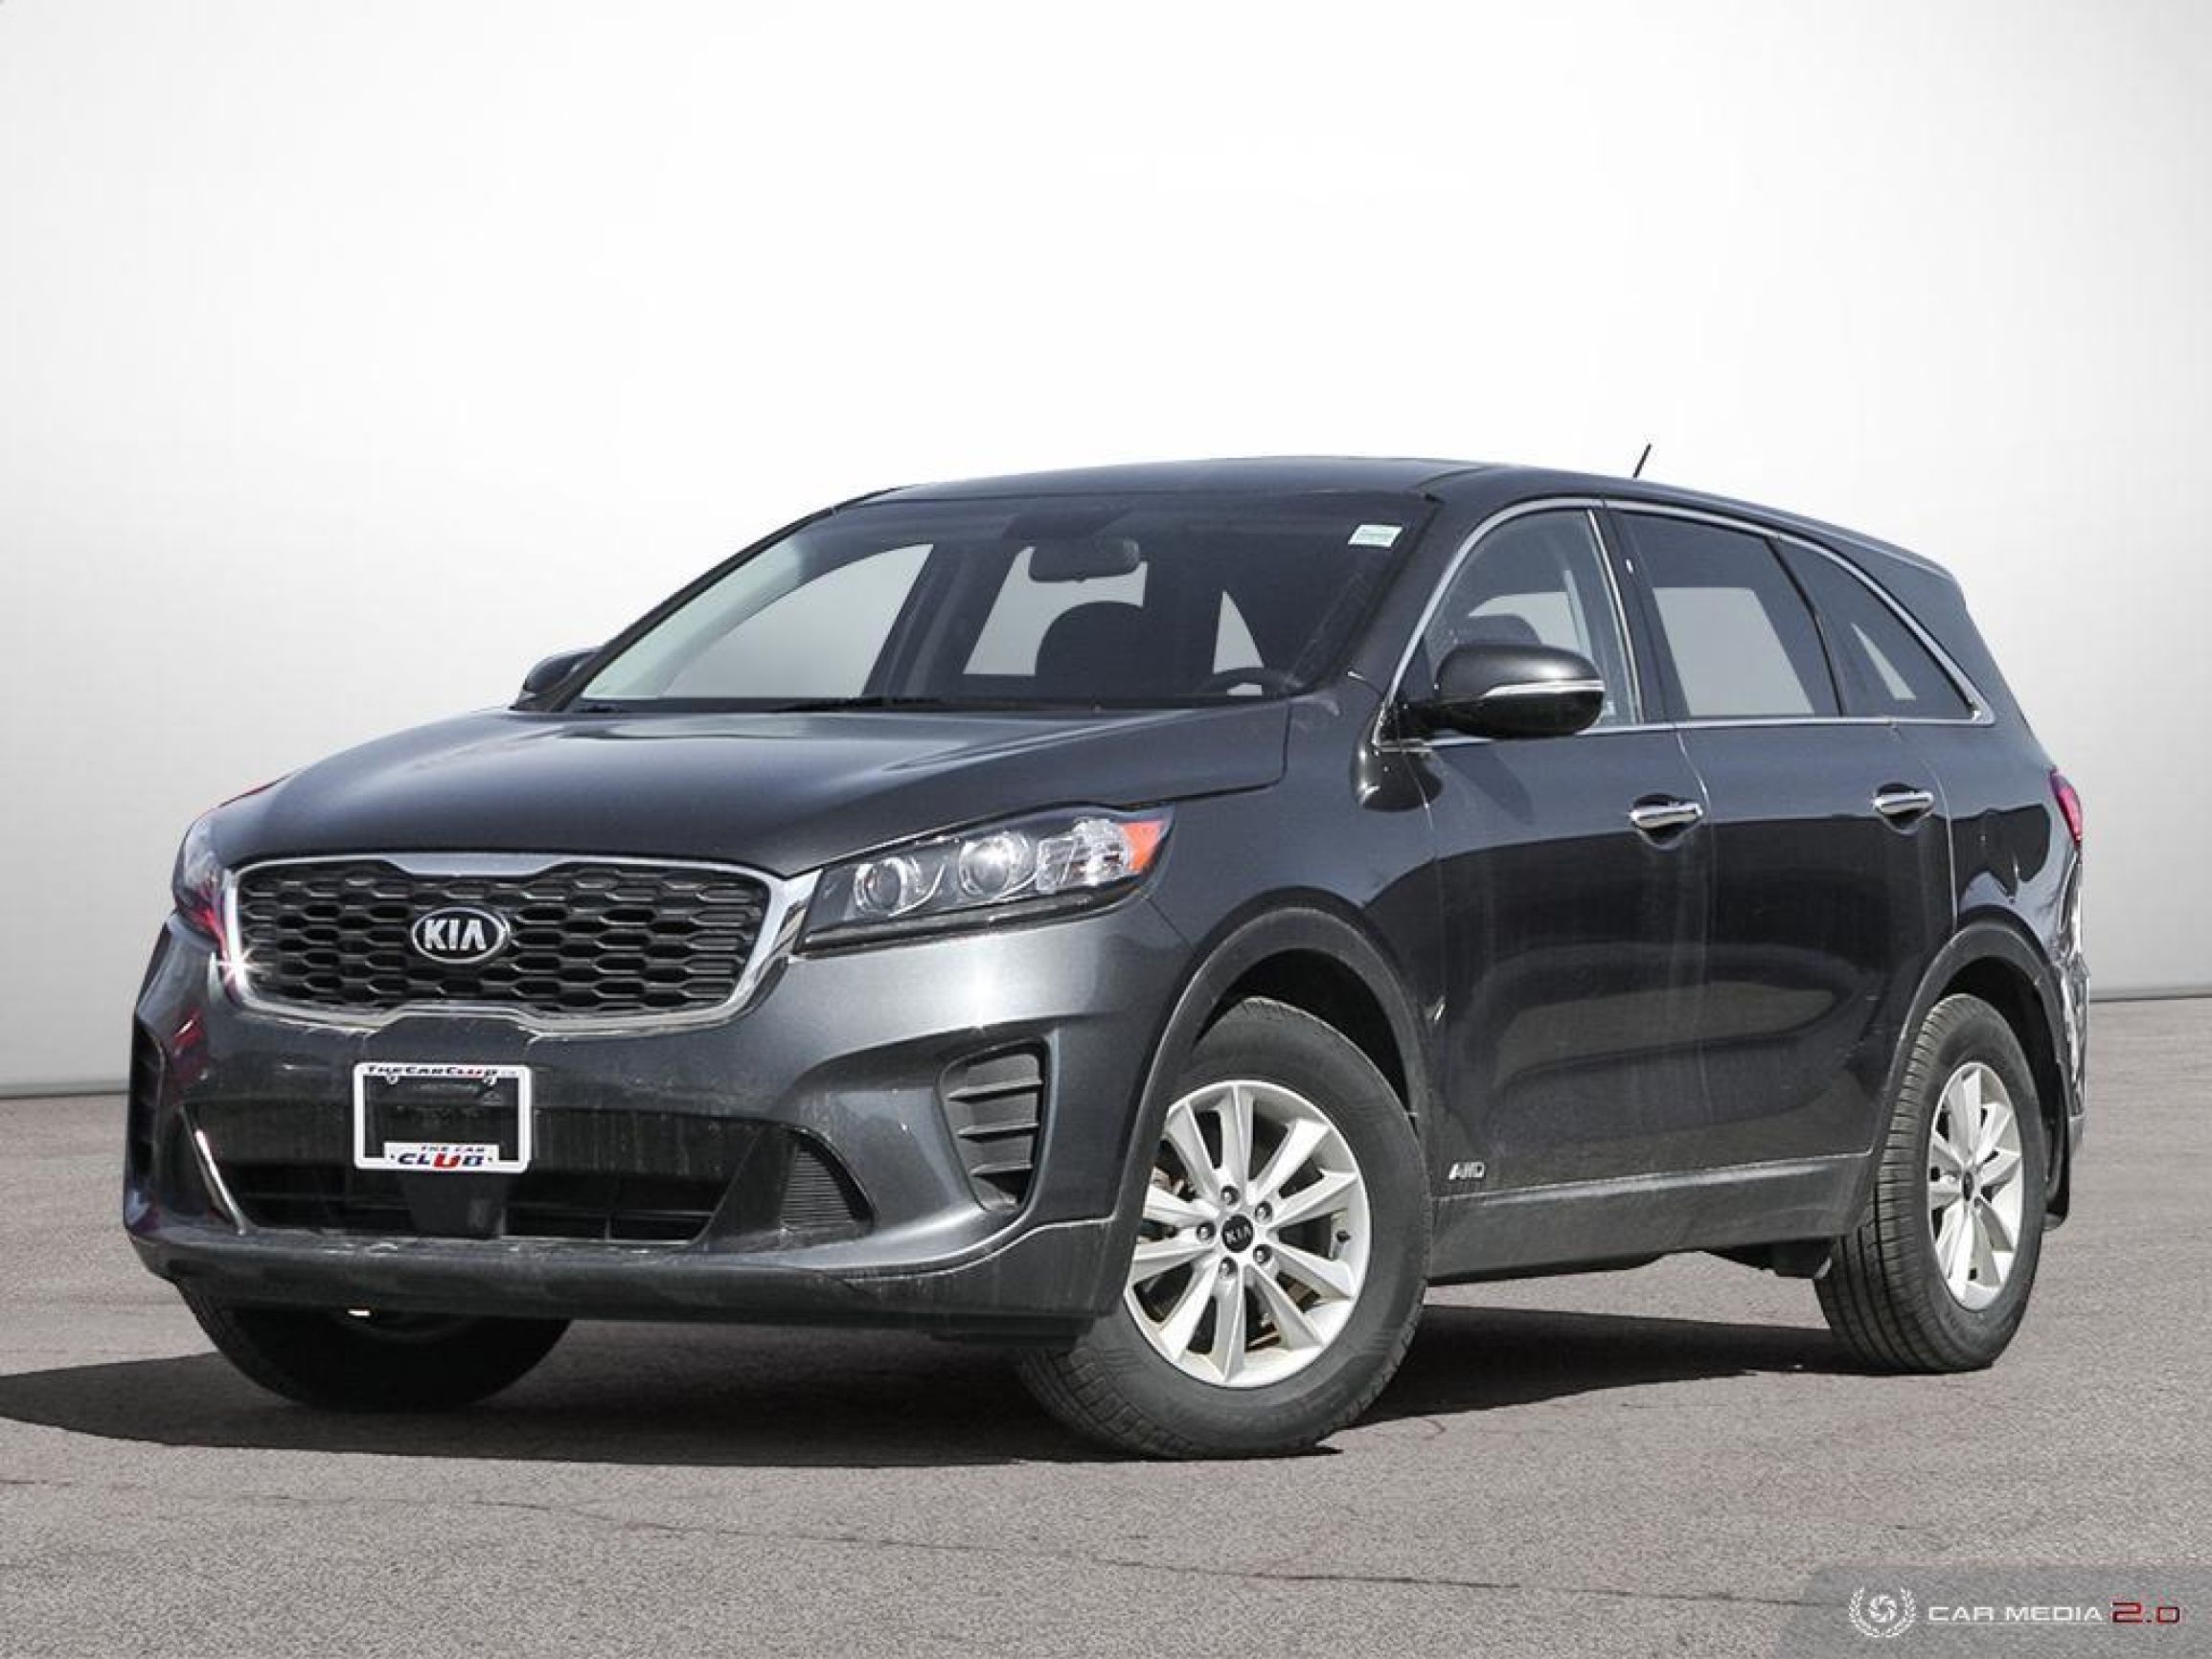 Used 2020 Kia Sorento in Ottawa, Ontario. Selling for $31,999 with only  74,206 KM. Contact The Car Club.